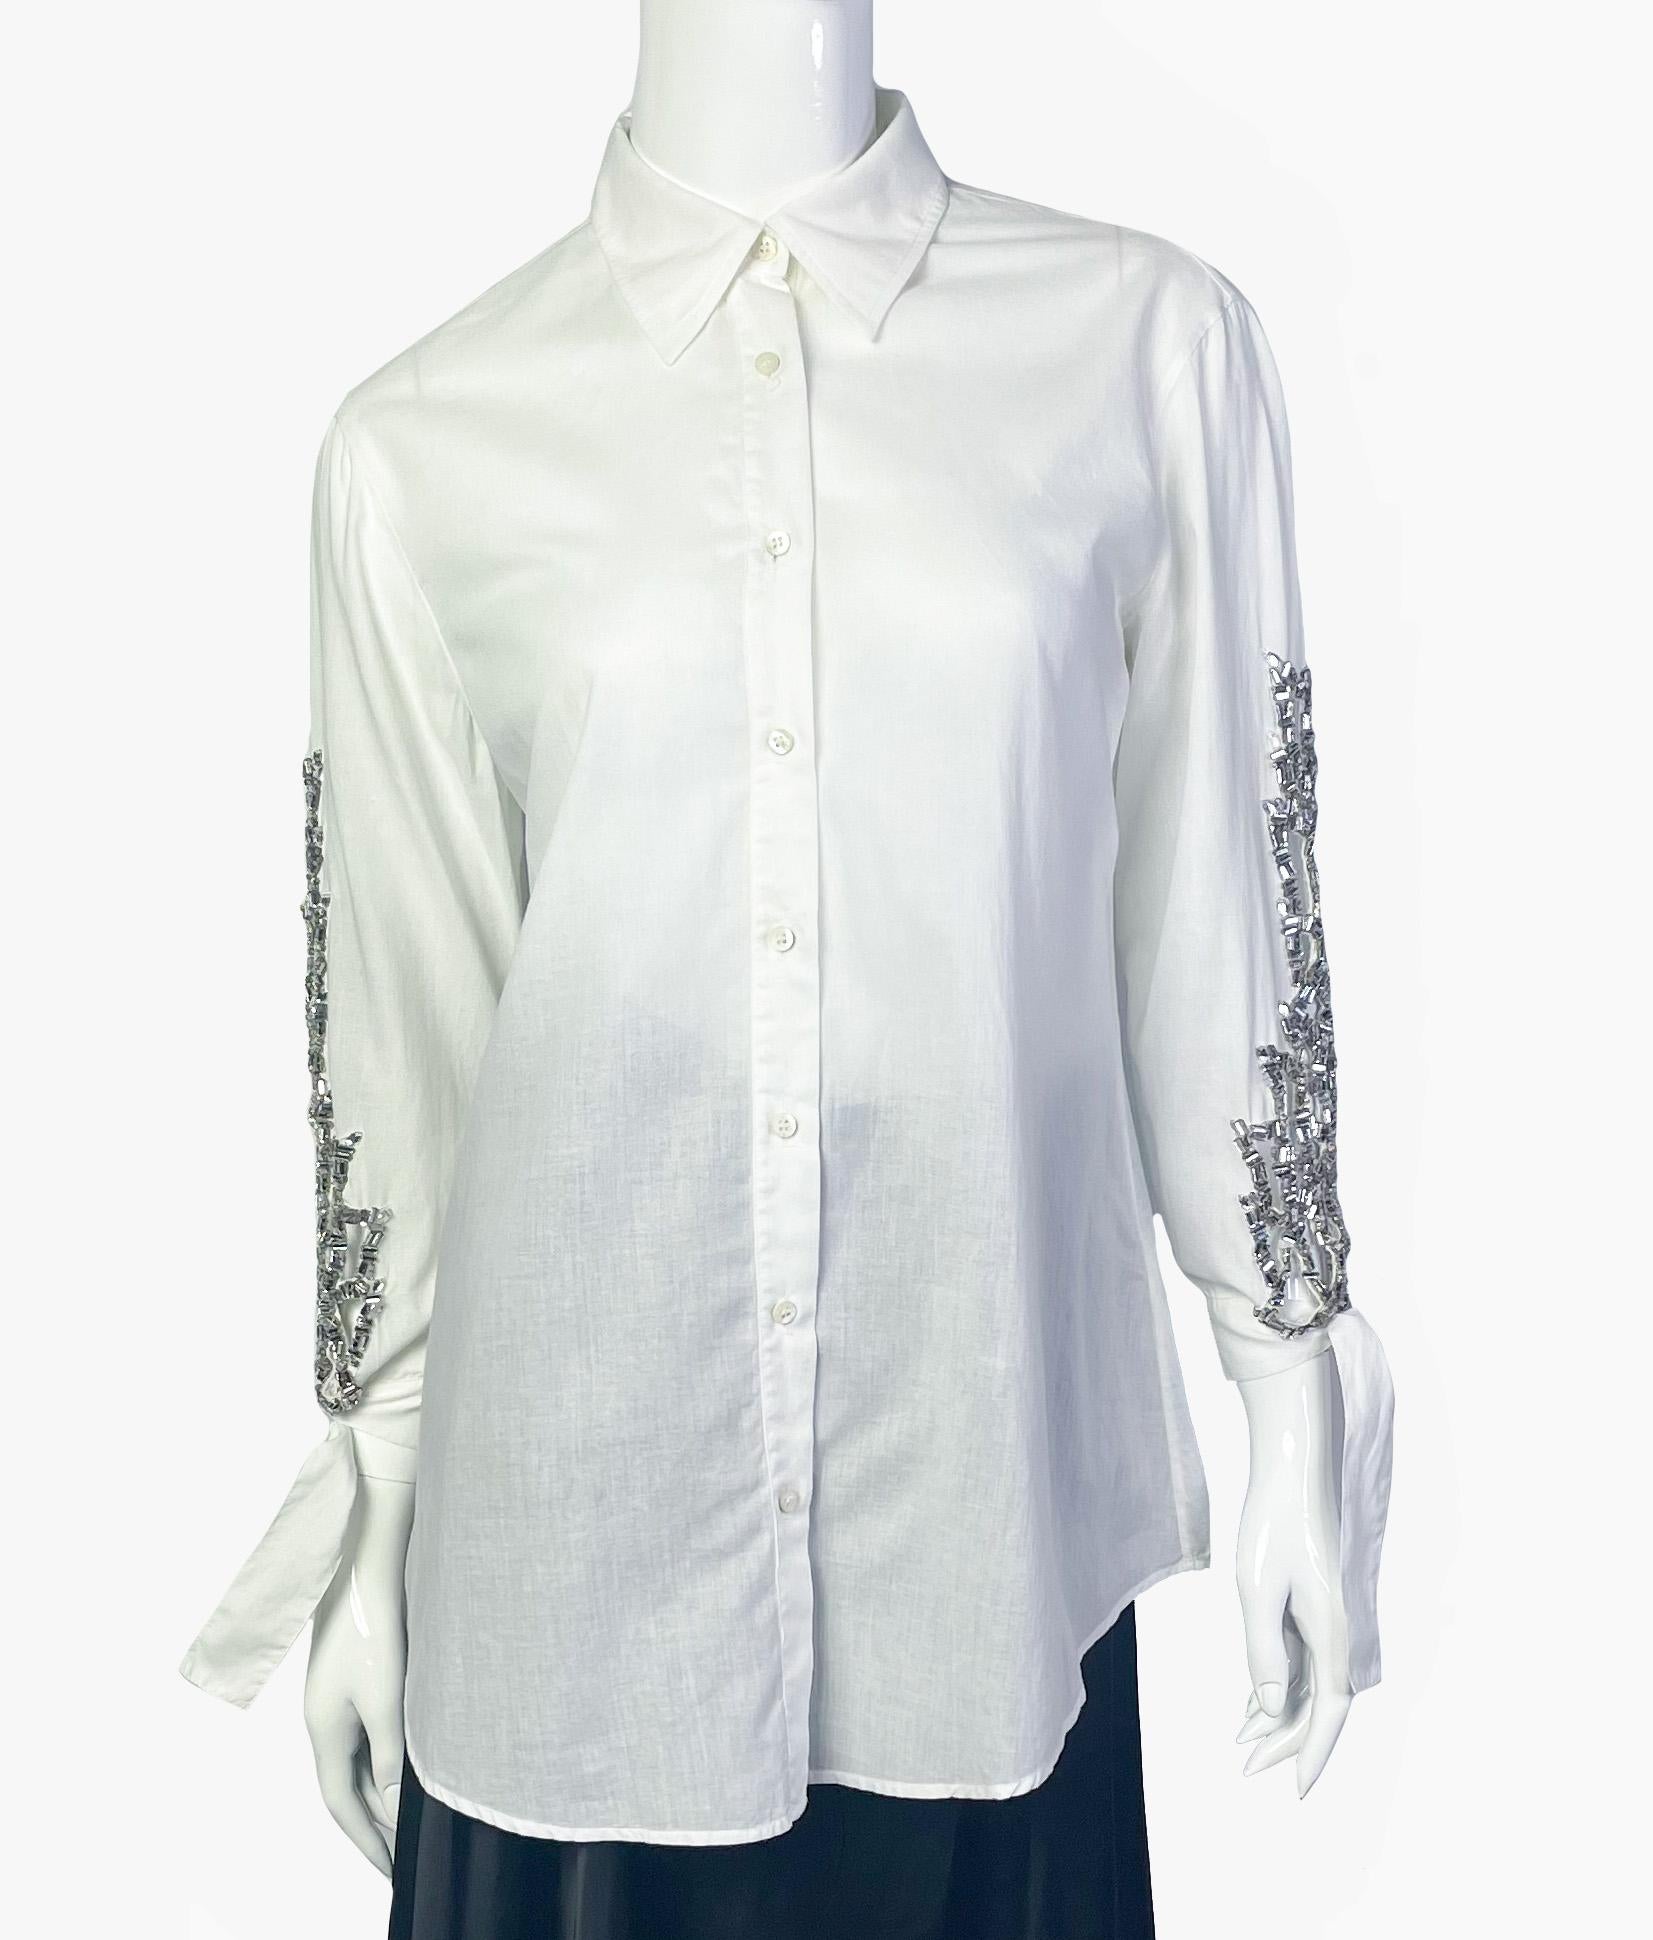 Roberto Cavalli button-up top with rhinestone appliqué on sleeves

Period – 2004

Size – XS-S

Length – 67,5 cm

Sleeve - 50 cm

From armpit to armpit – 48 cm

Waist – 84 cm

Fabric – 100% cotton

Condition – very good

........Additional